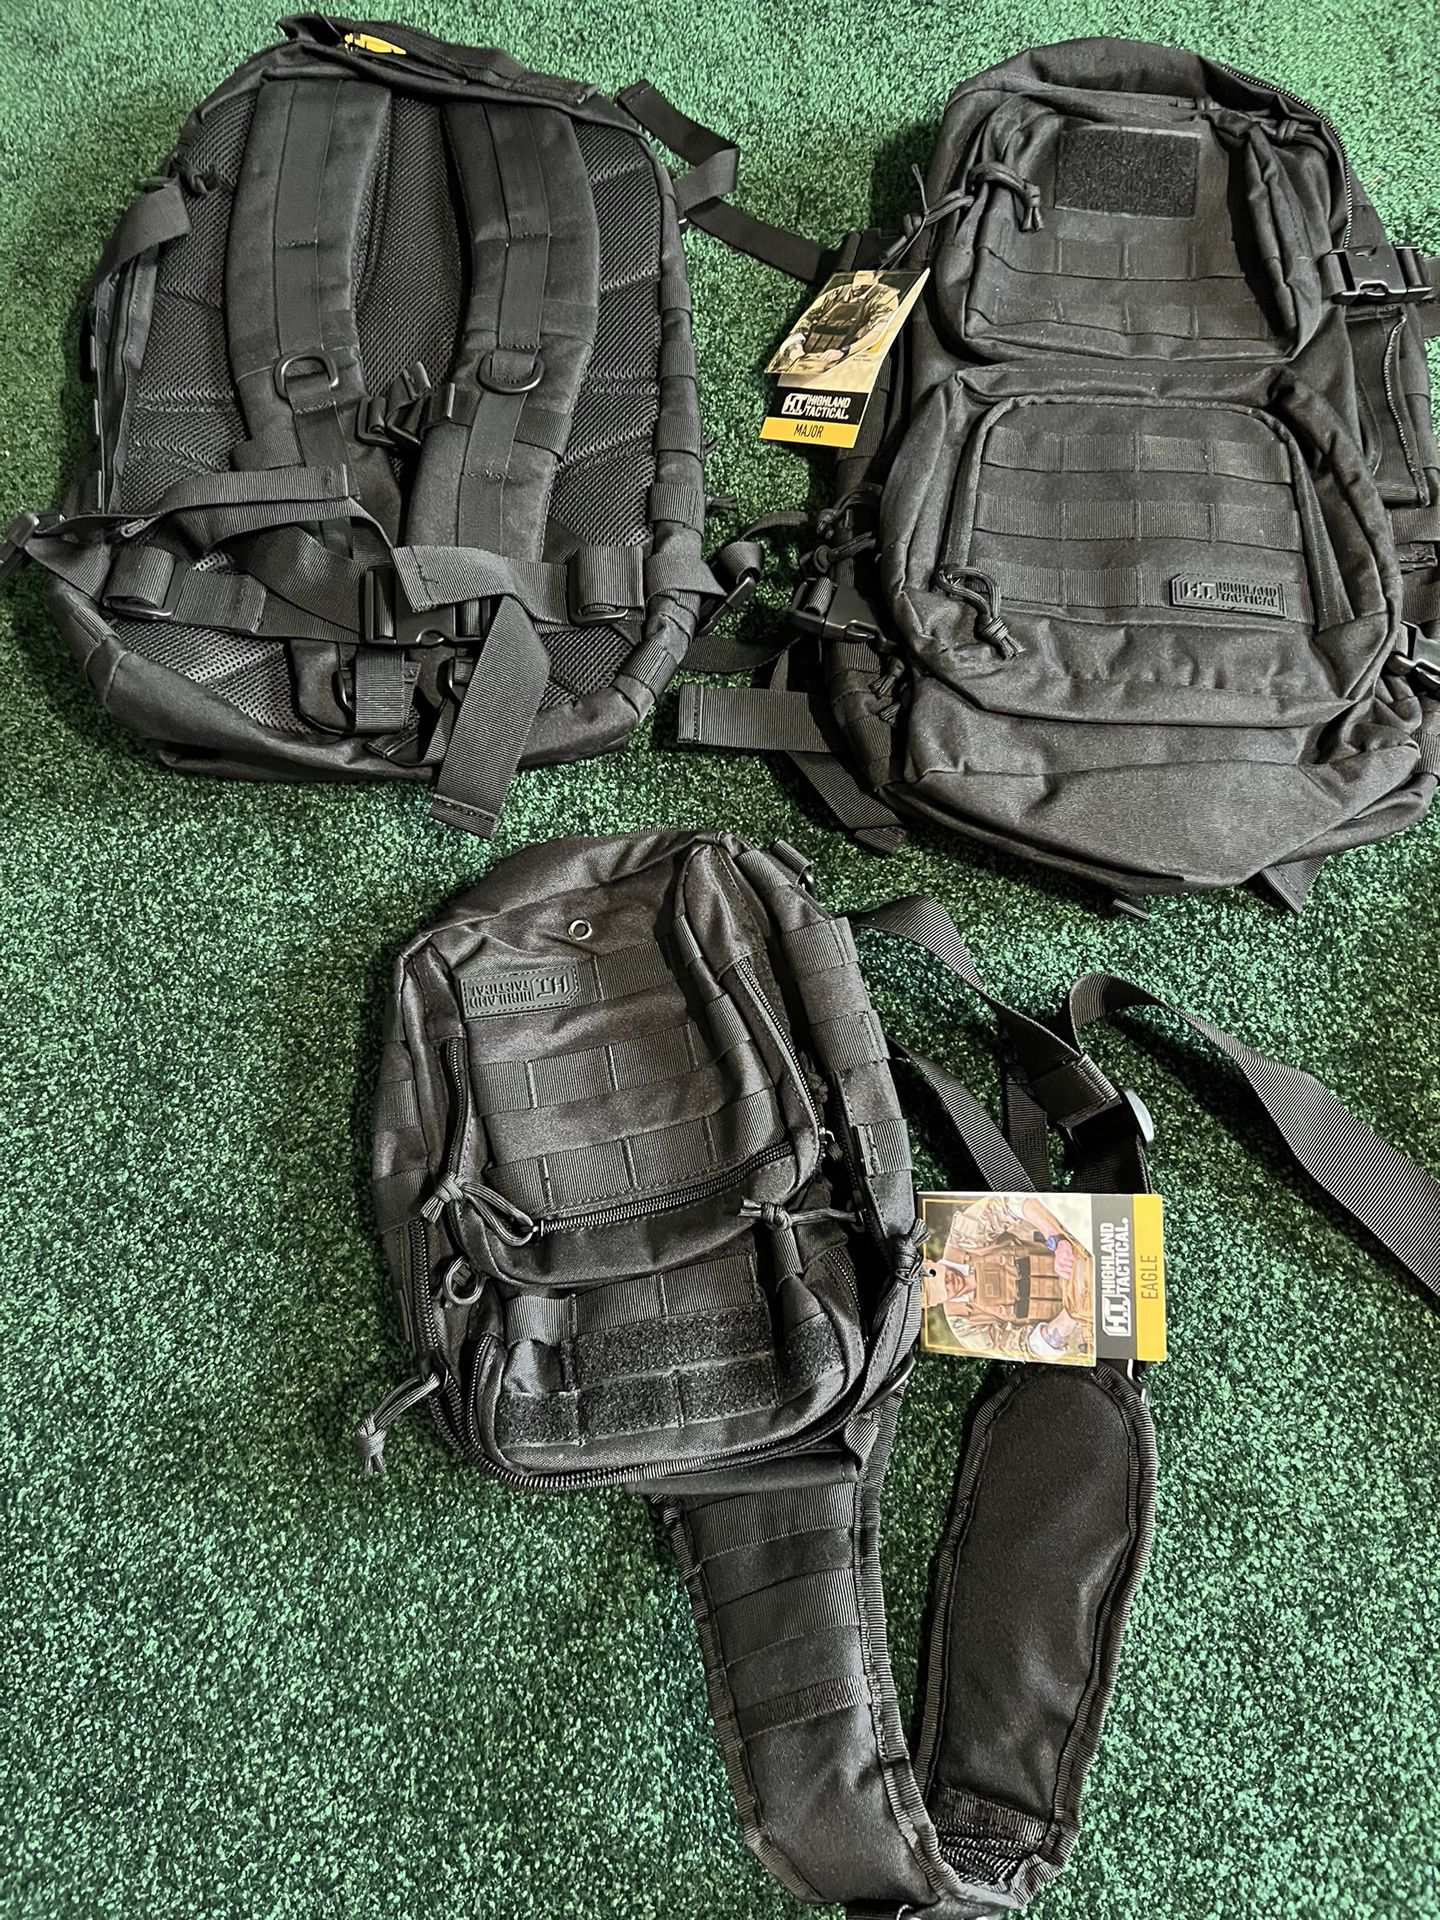 Backpacks, recon, new, $49 each, military grade